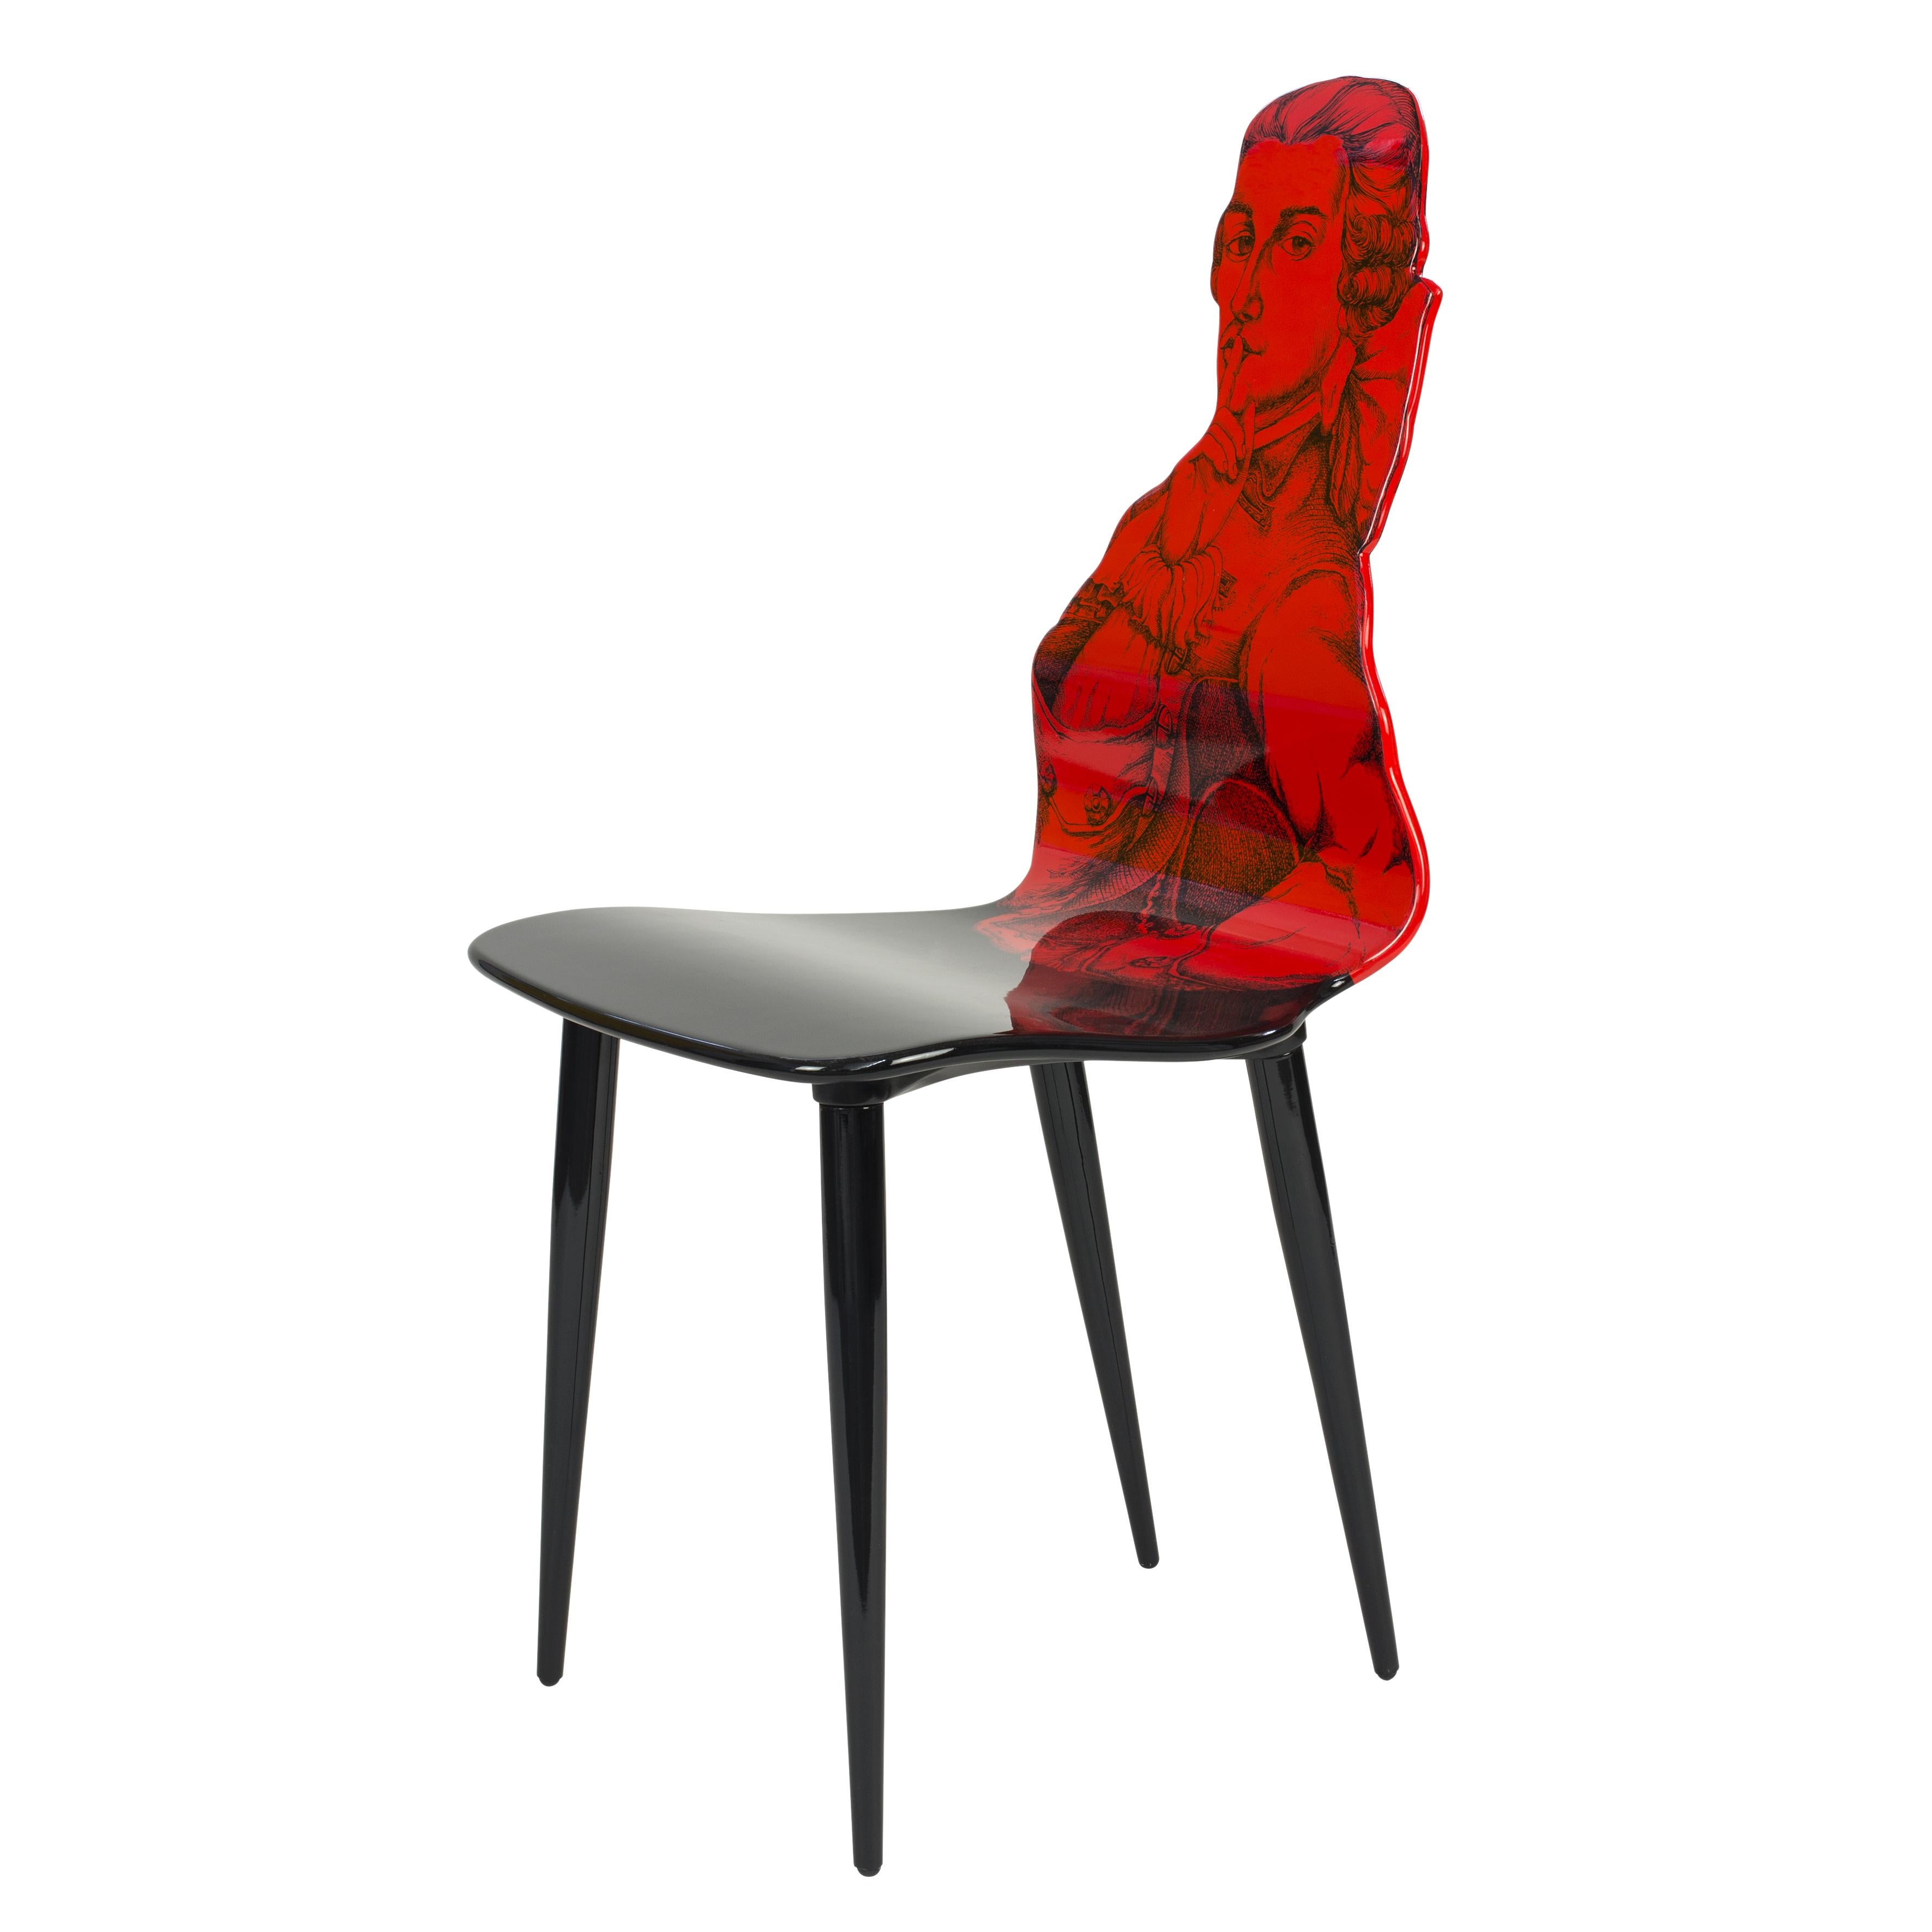 Modern Fornasetti Chair Don Giovanni Mozart Wood Red